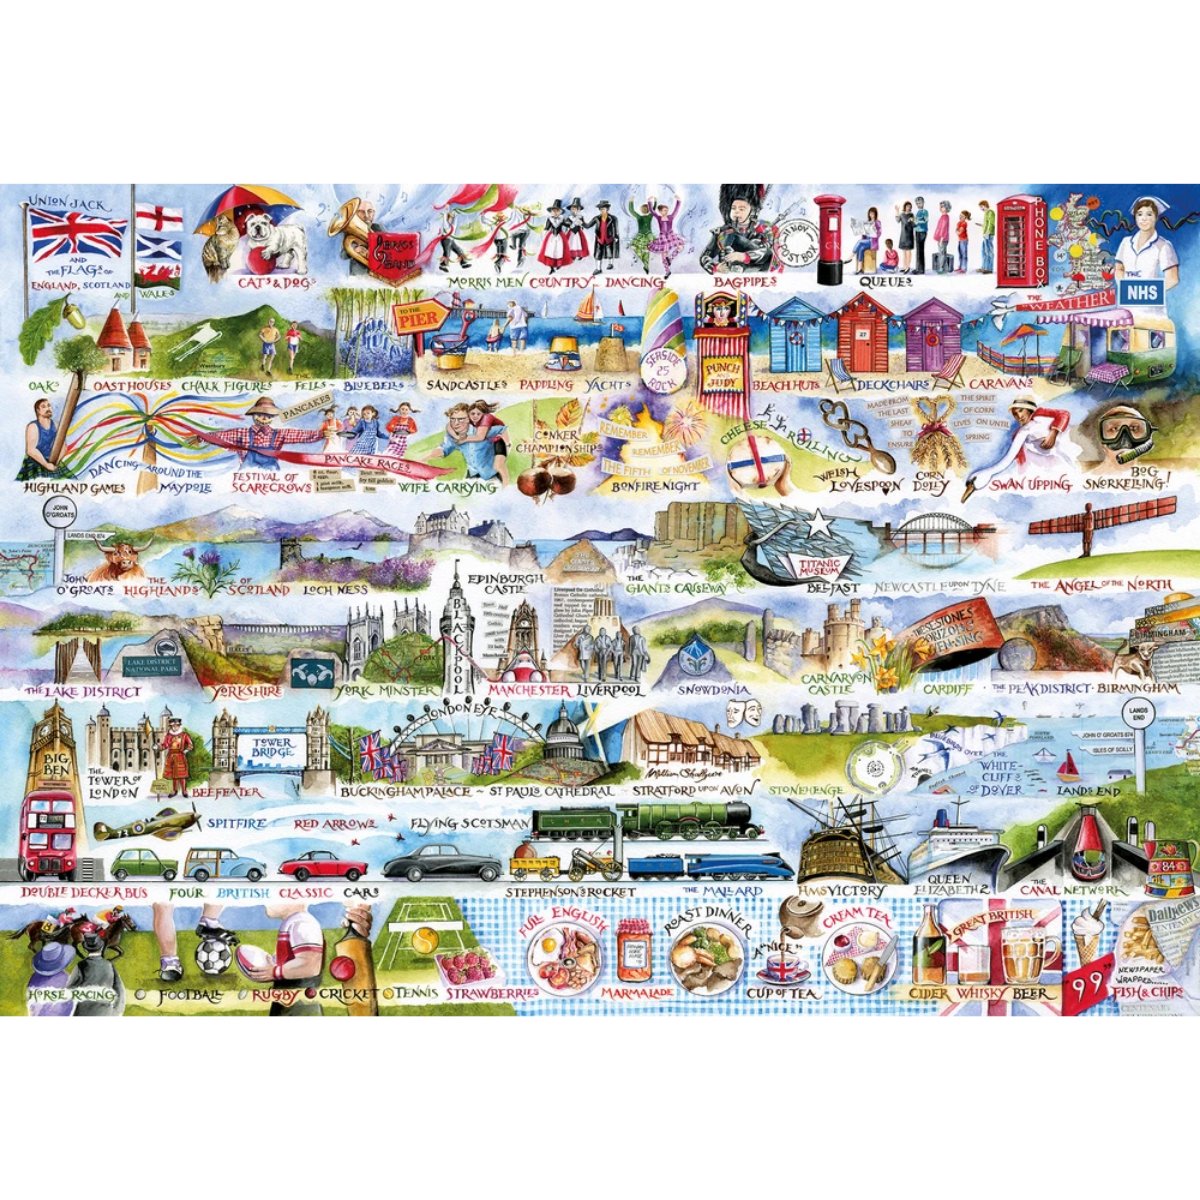 Gibsons Cream Teas & Queuing Jigsaw Puzzle (2000 Pieces) - Phillips Hobbies